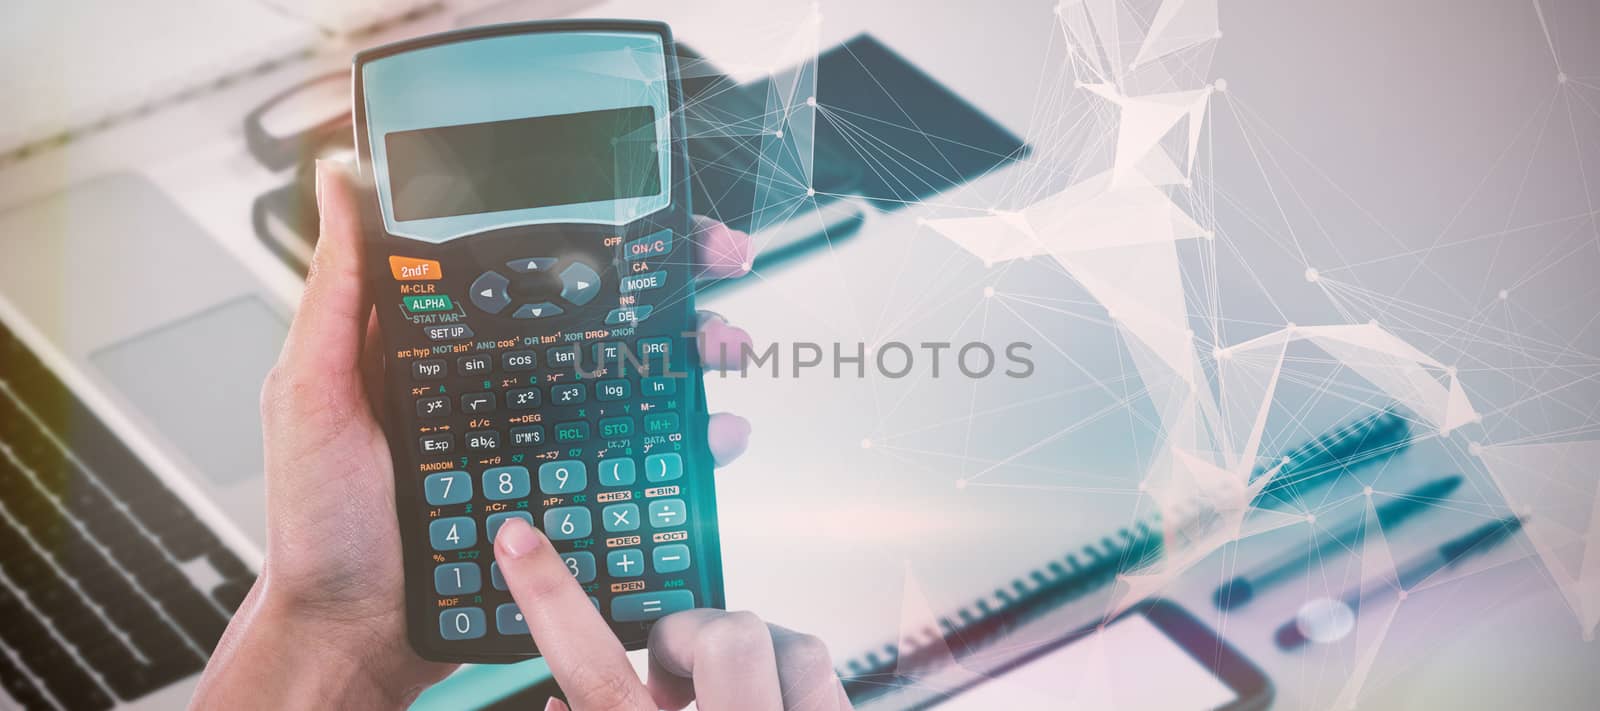 Hands of businesswoman using calculator against digitally generated image of abstract pattern on screen